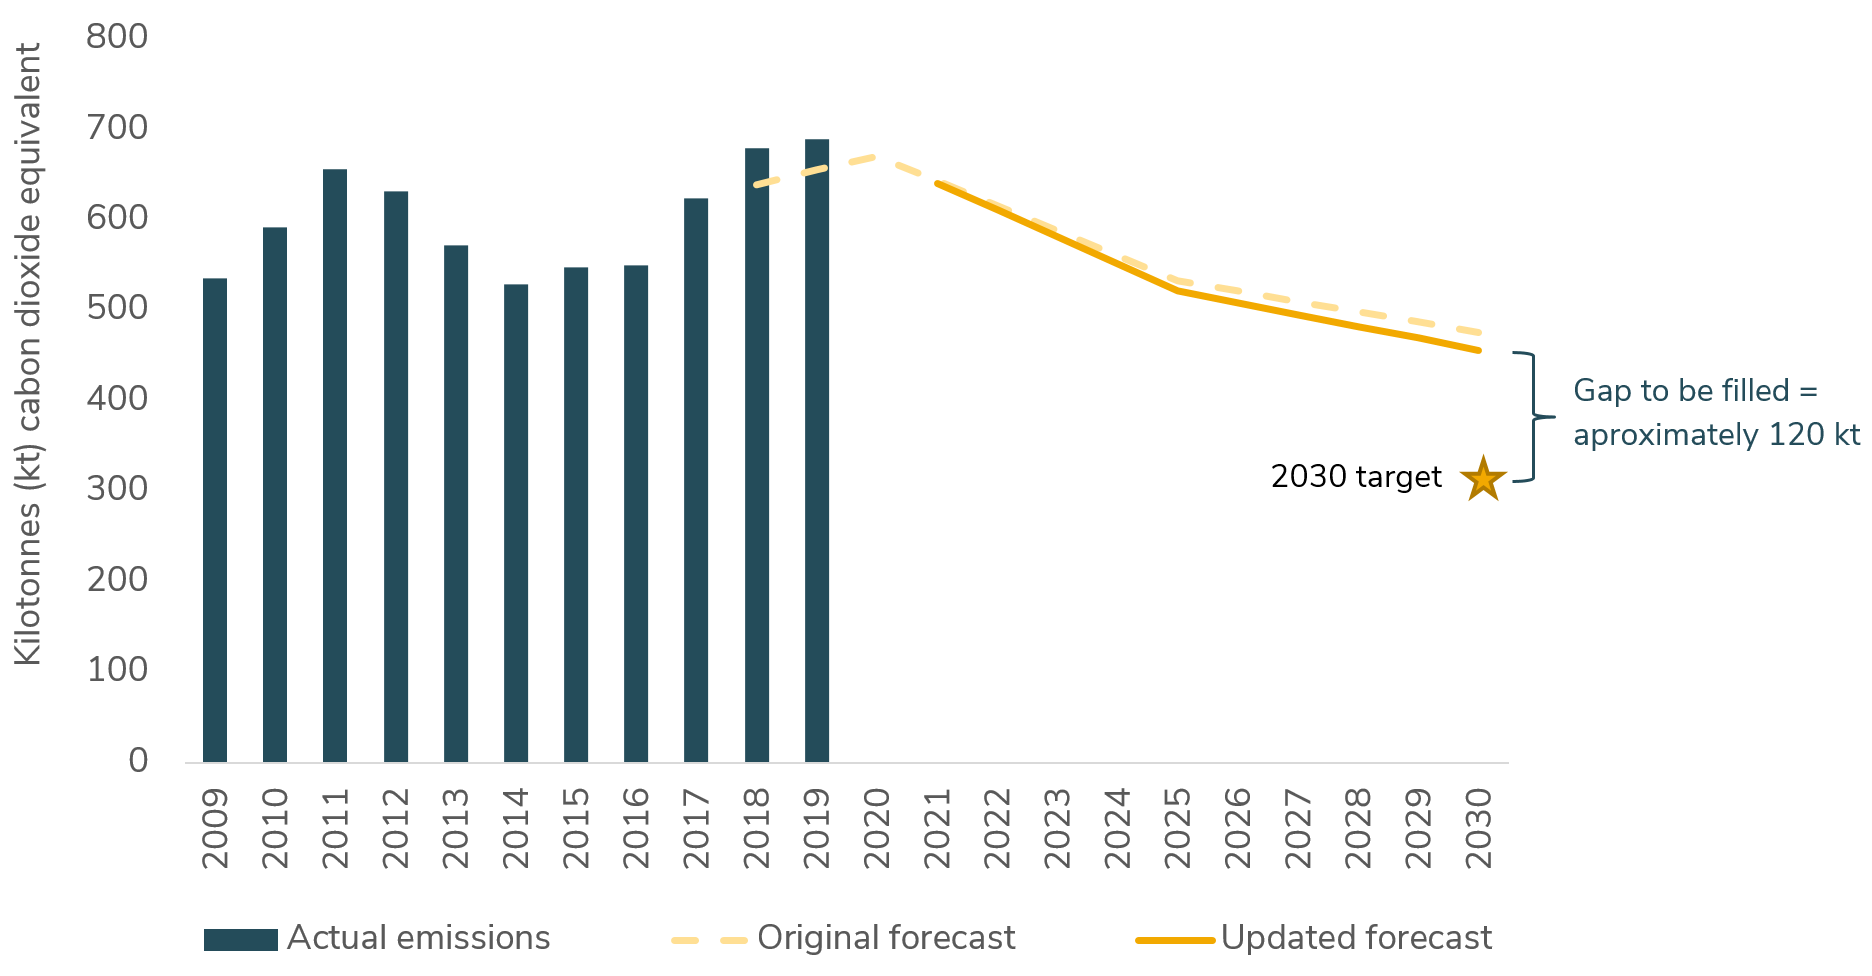 Graph showing kilotonnes of carbon dioxide equivalent from 2009 to 2019 from 500 to 700 kilotonnes and projected emissions from 2020 to 2030. The projection is 120 kilotonnes higher than the 2030 target for emissions.